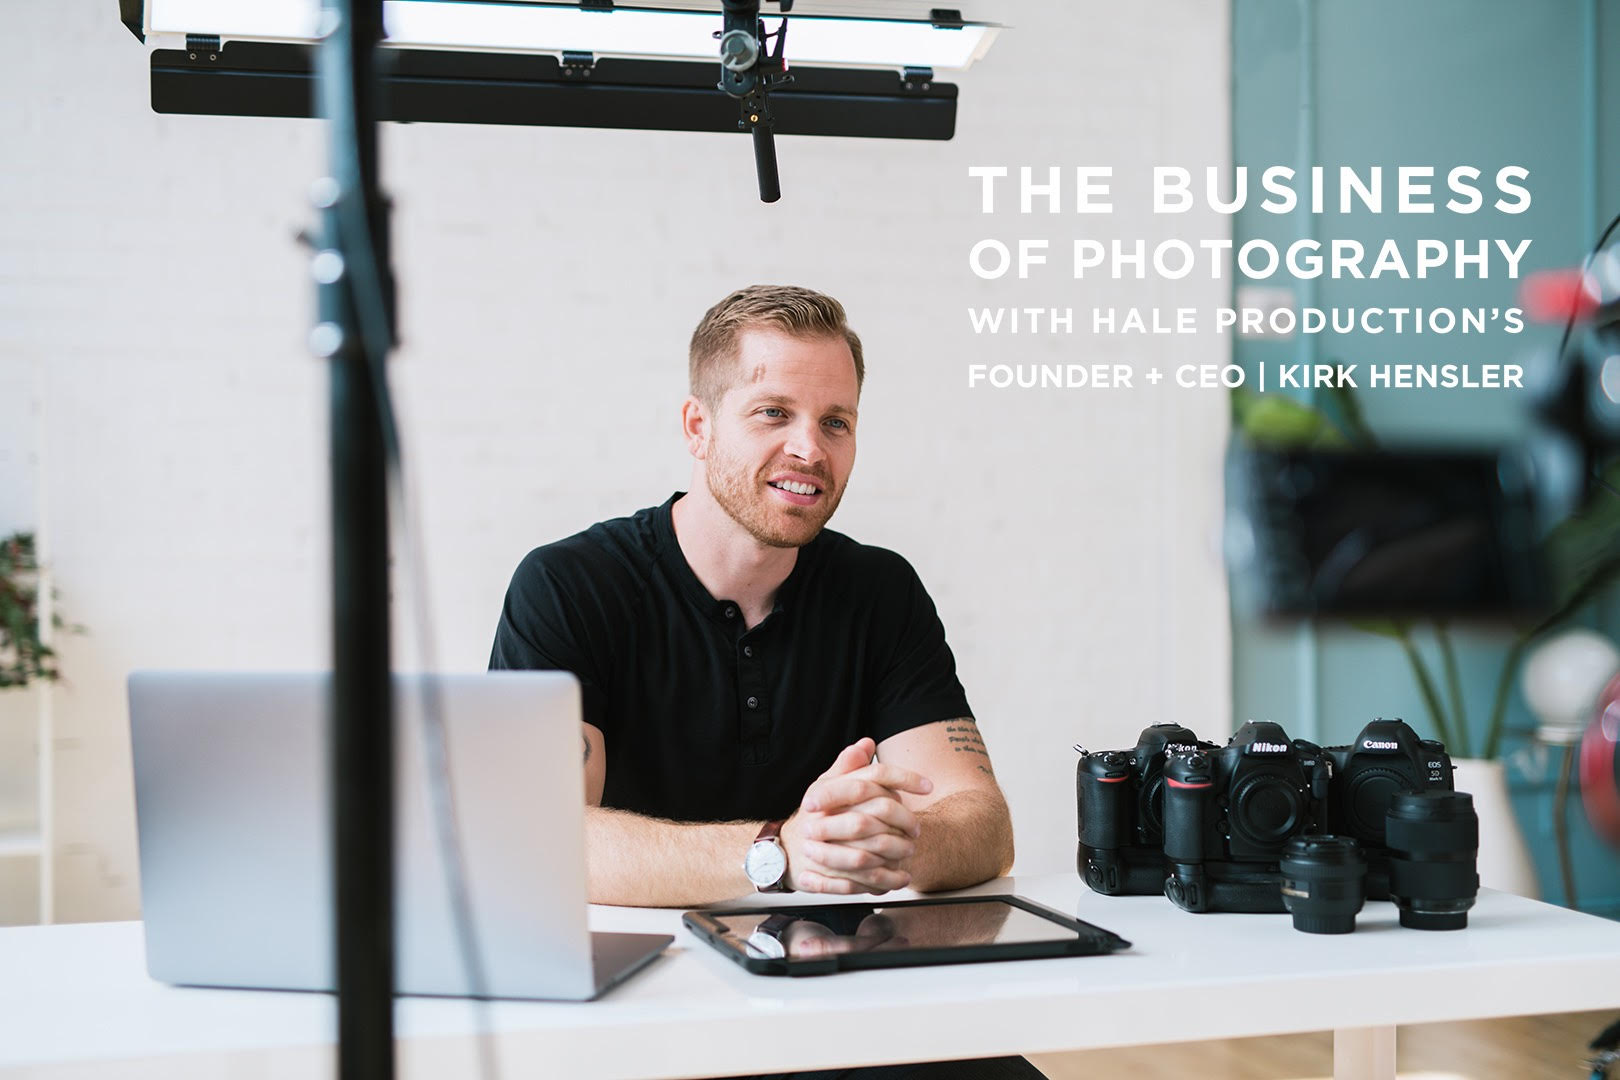 Kirk Hensler founder and CEO of Hale Productions hosting "The Business of Photography" course 